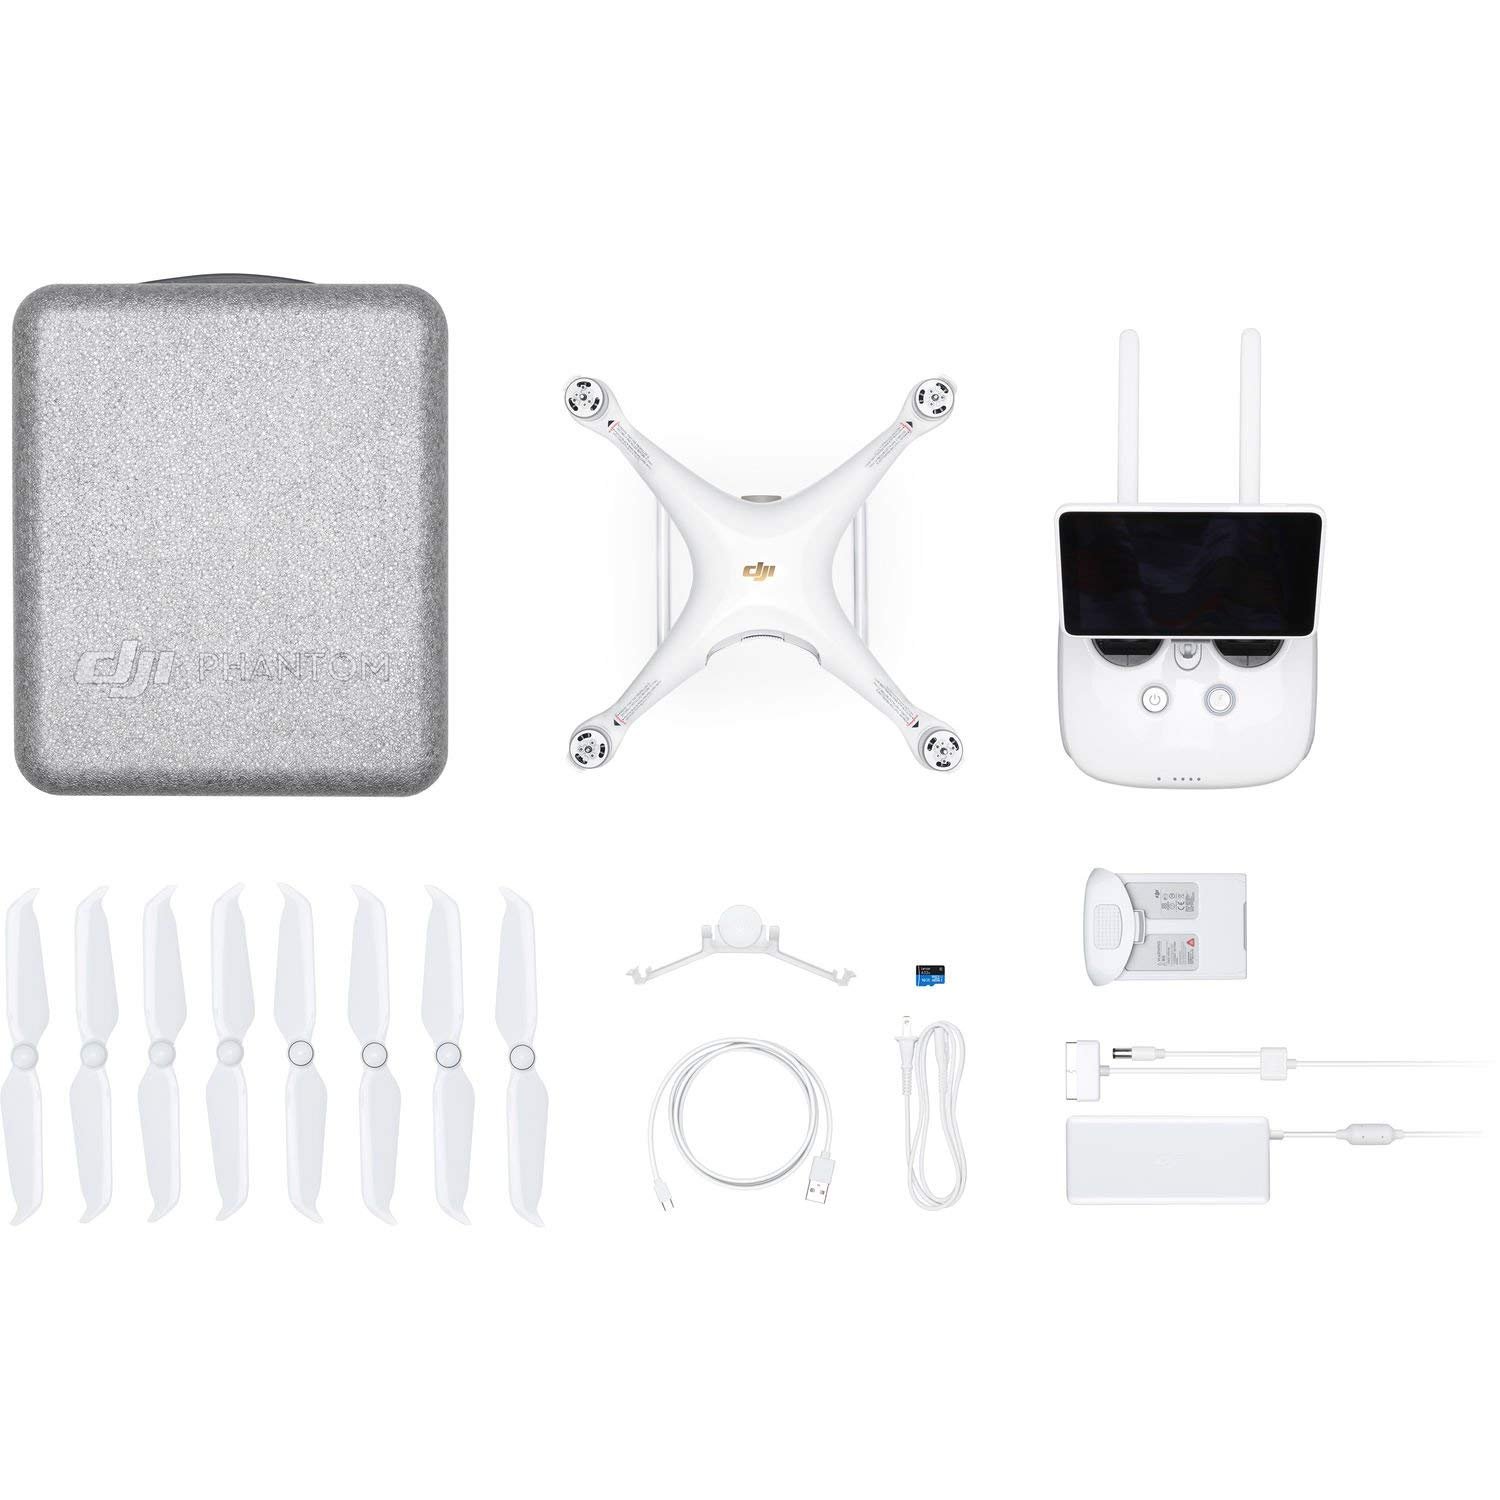 dji phantom 4 pro plus (pro+)quadcopter drone with 1-inch 20mp 4k camera kit with built in monitor + 3 total dji batteries + 2 64gb micro sd cards + reader + guards + range extender + charging hub - image 4 of 5